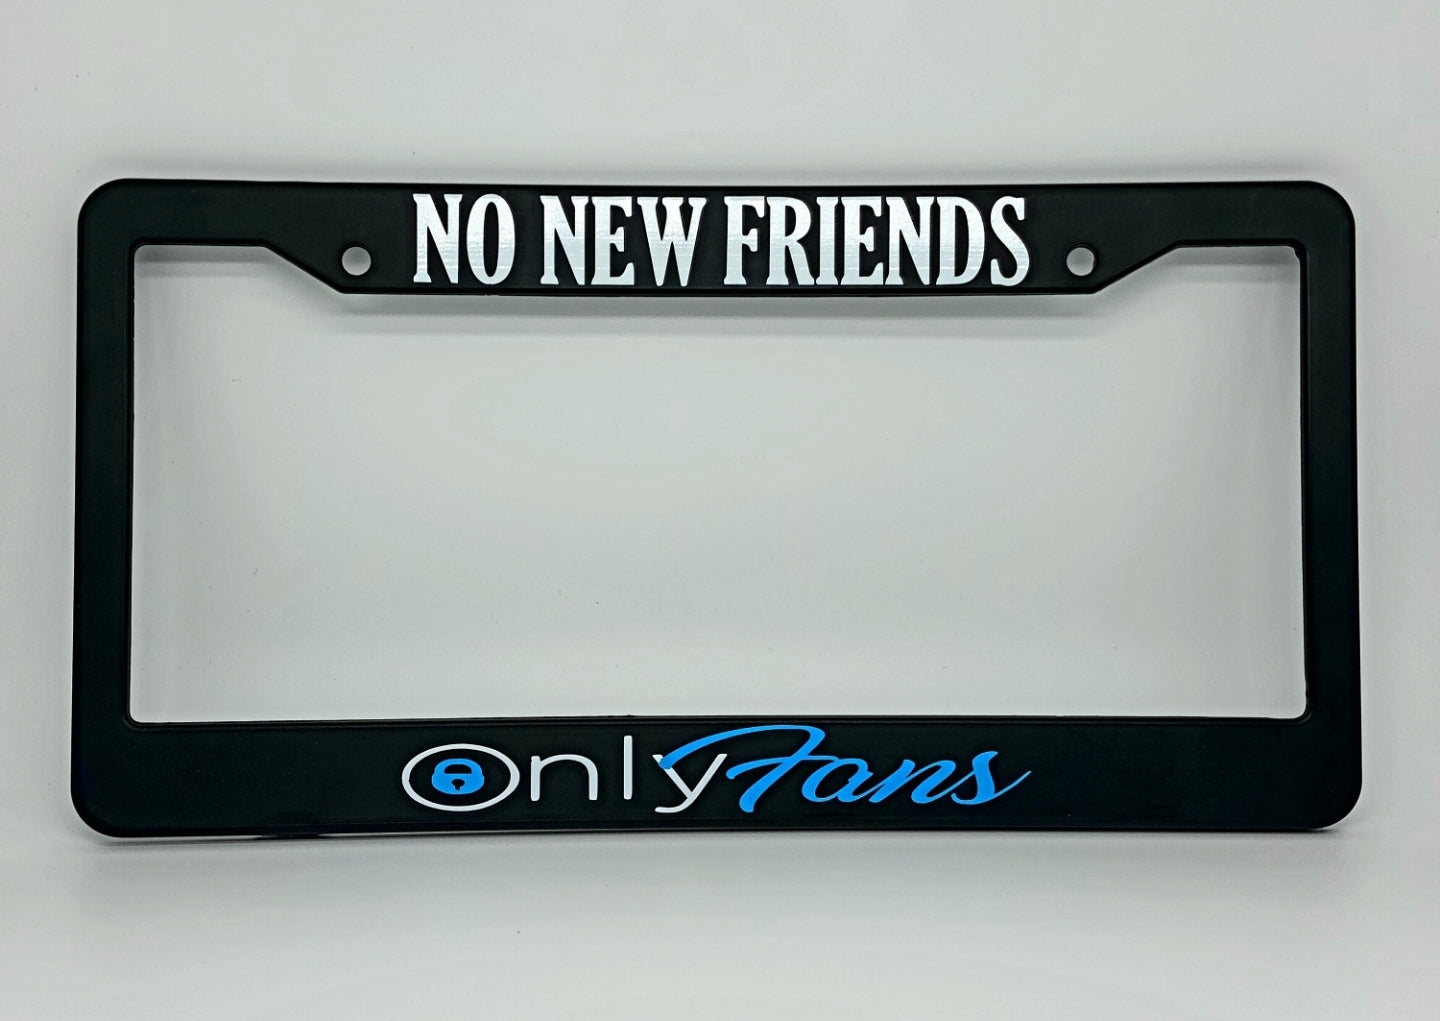 No new friends, Only Fans (Plate Frame)